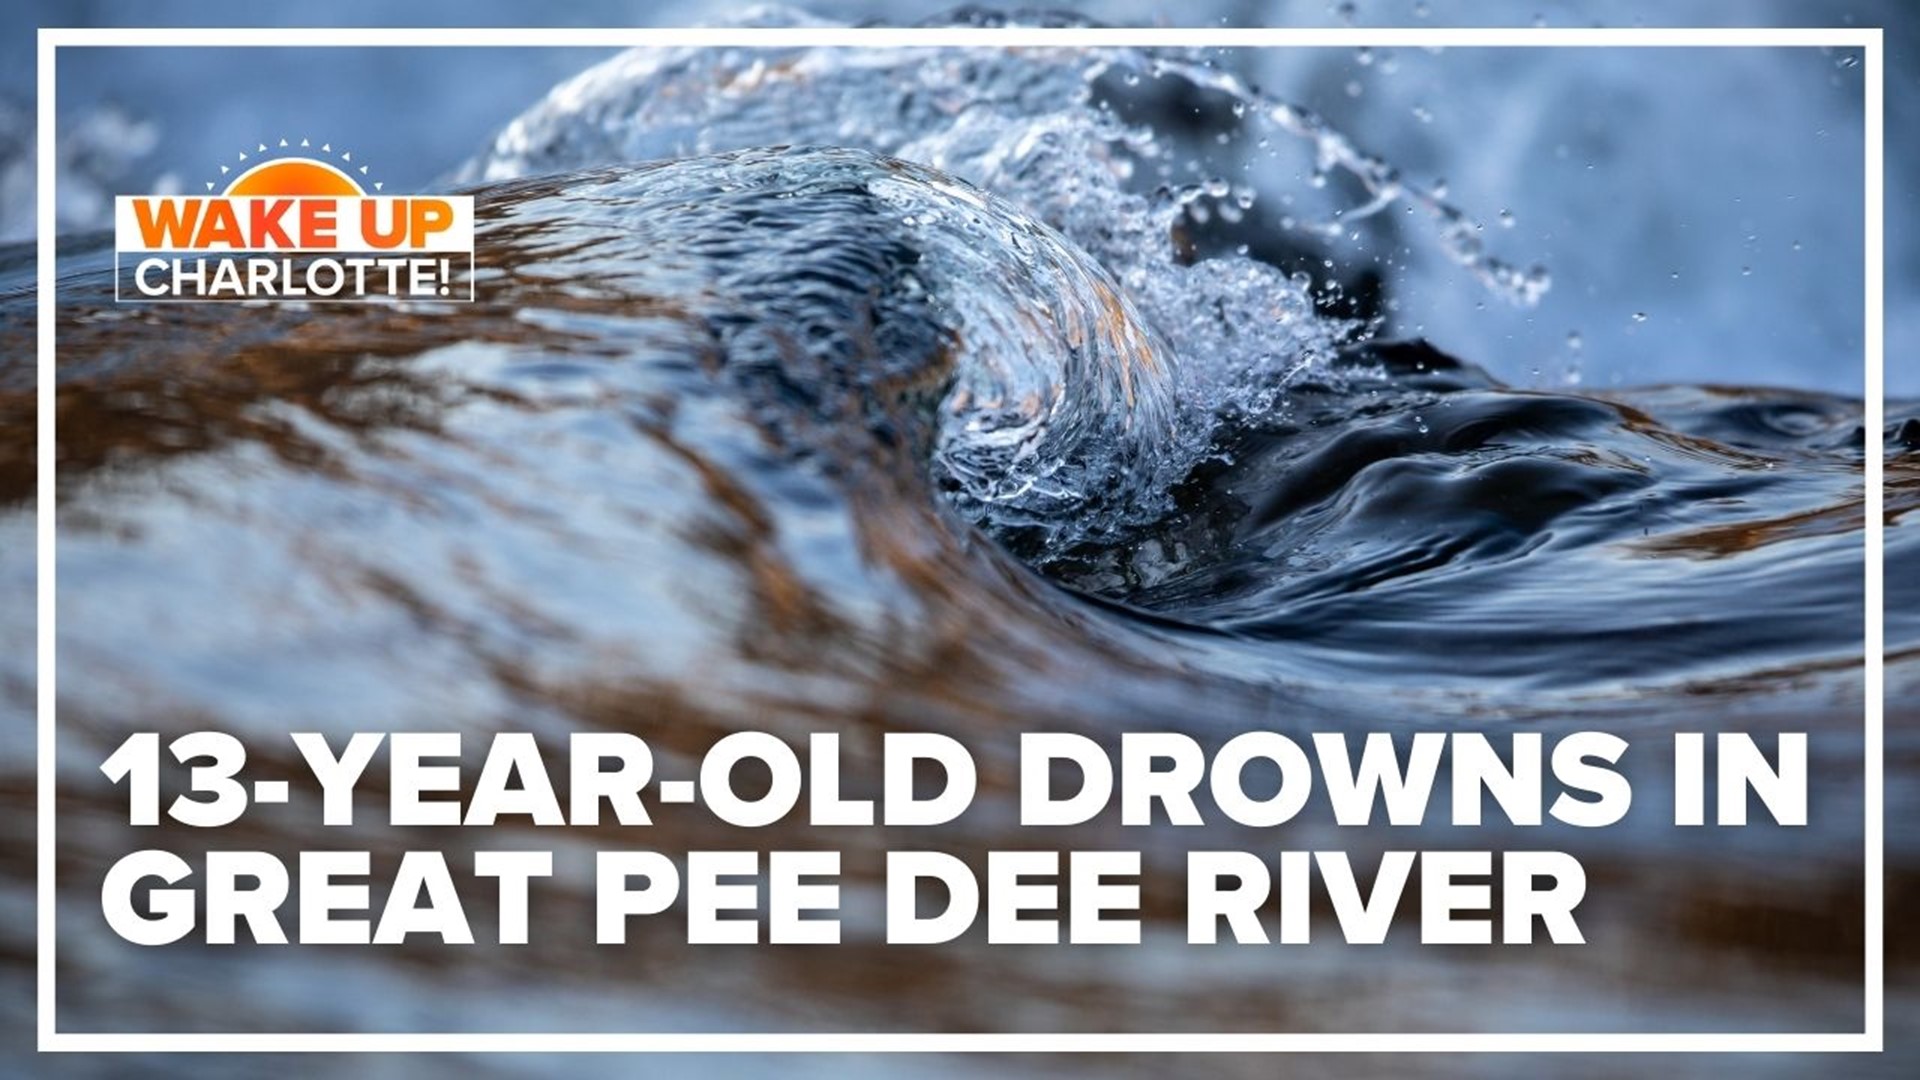 Officials in Chesterfield County said a teenage girl drowned in the Great Pee Dee River in Cheraw Wednesday.